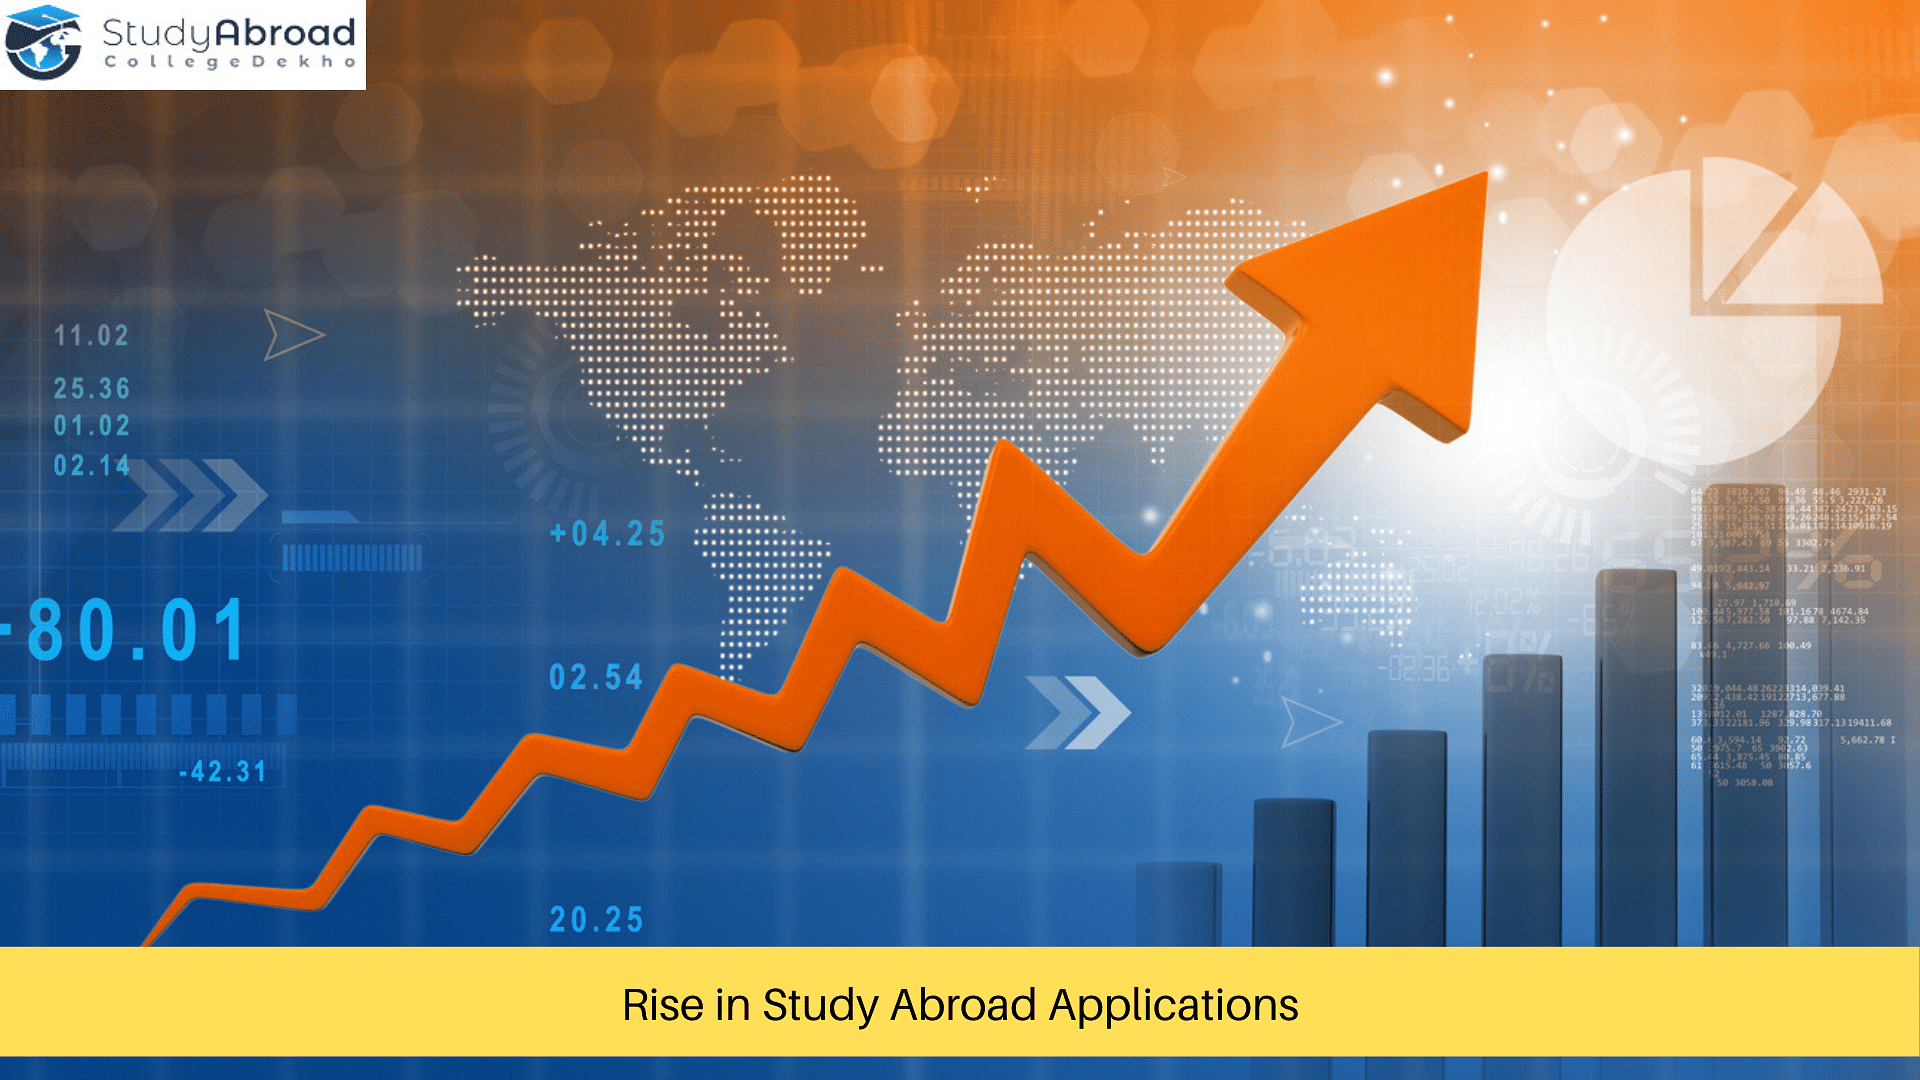 Increase in Study Abroad Applications